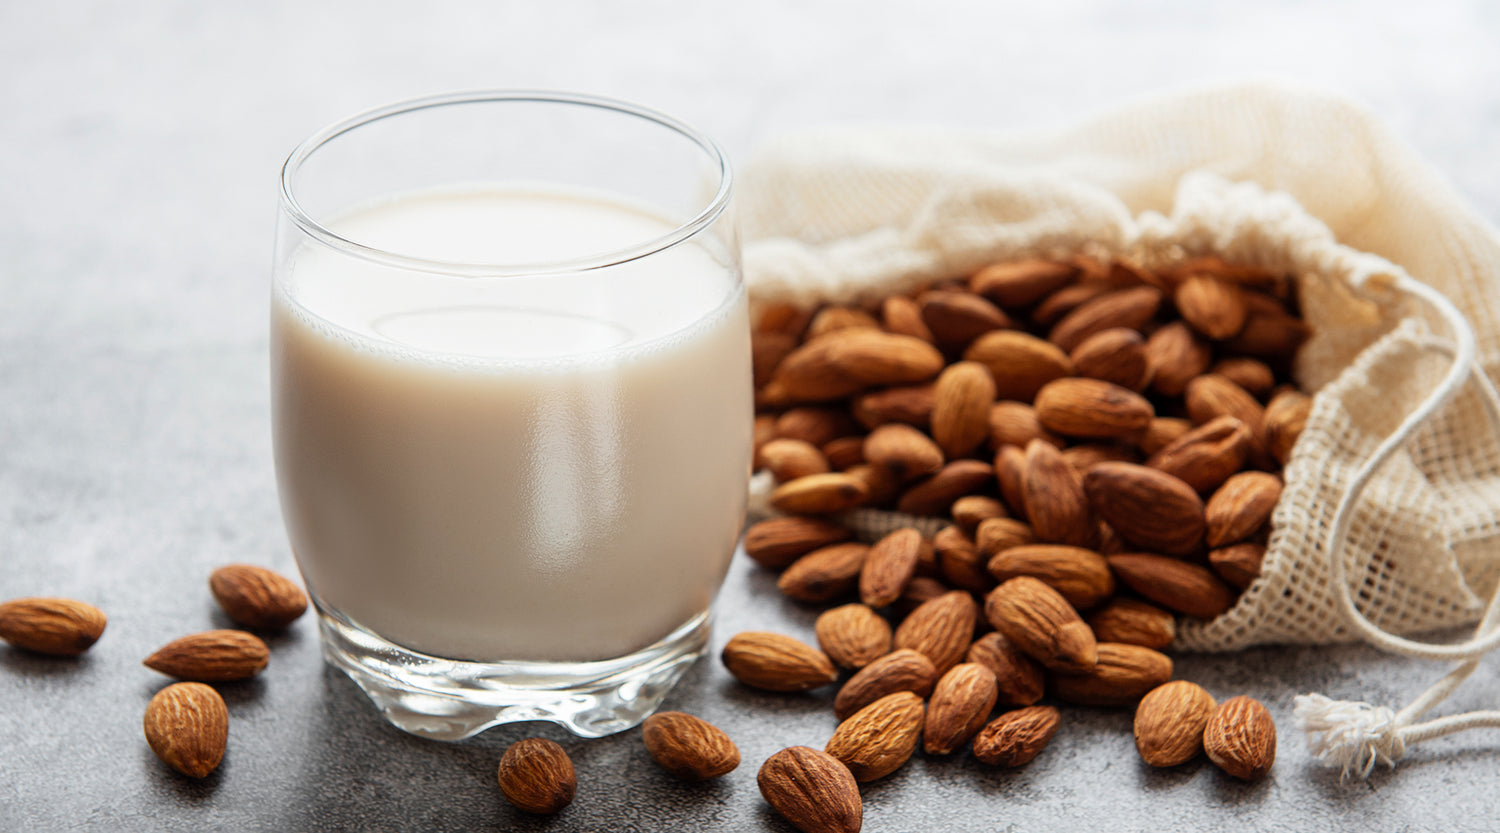 Why You Should Never Drink Almond Milk Again